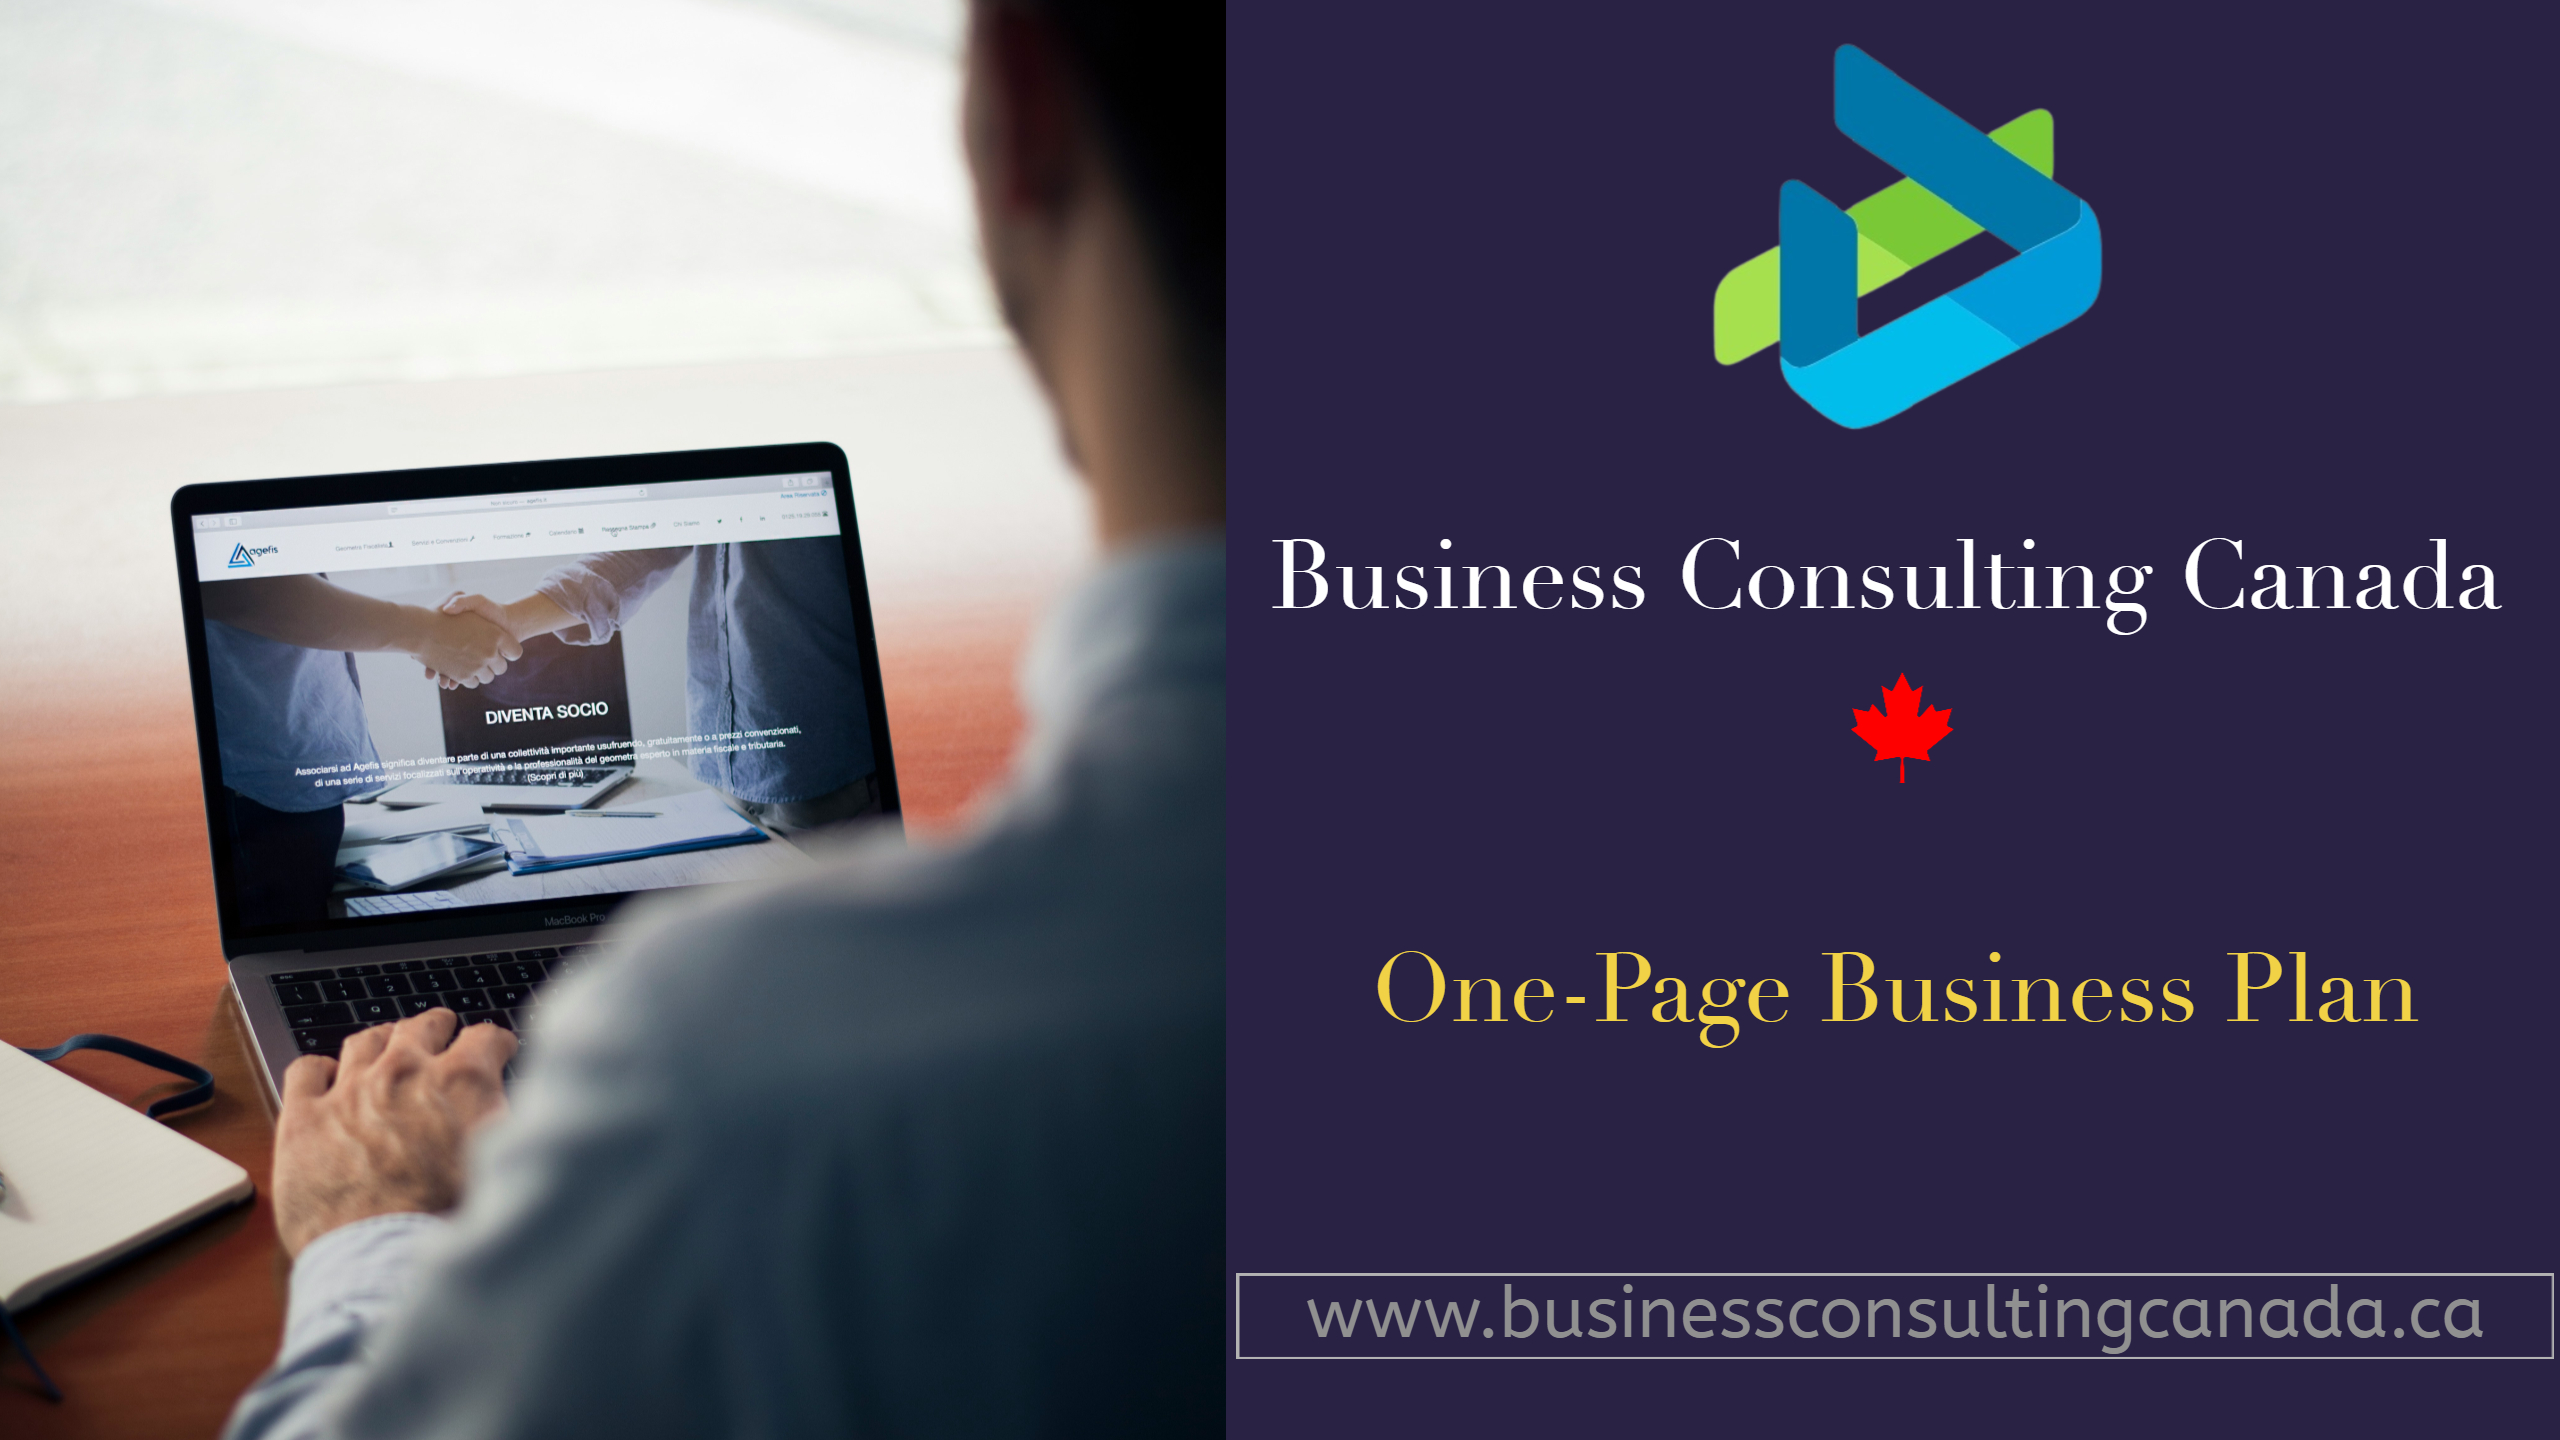 One-Page Business Plan